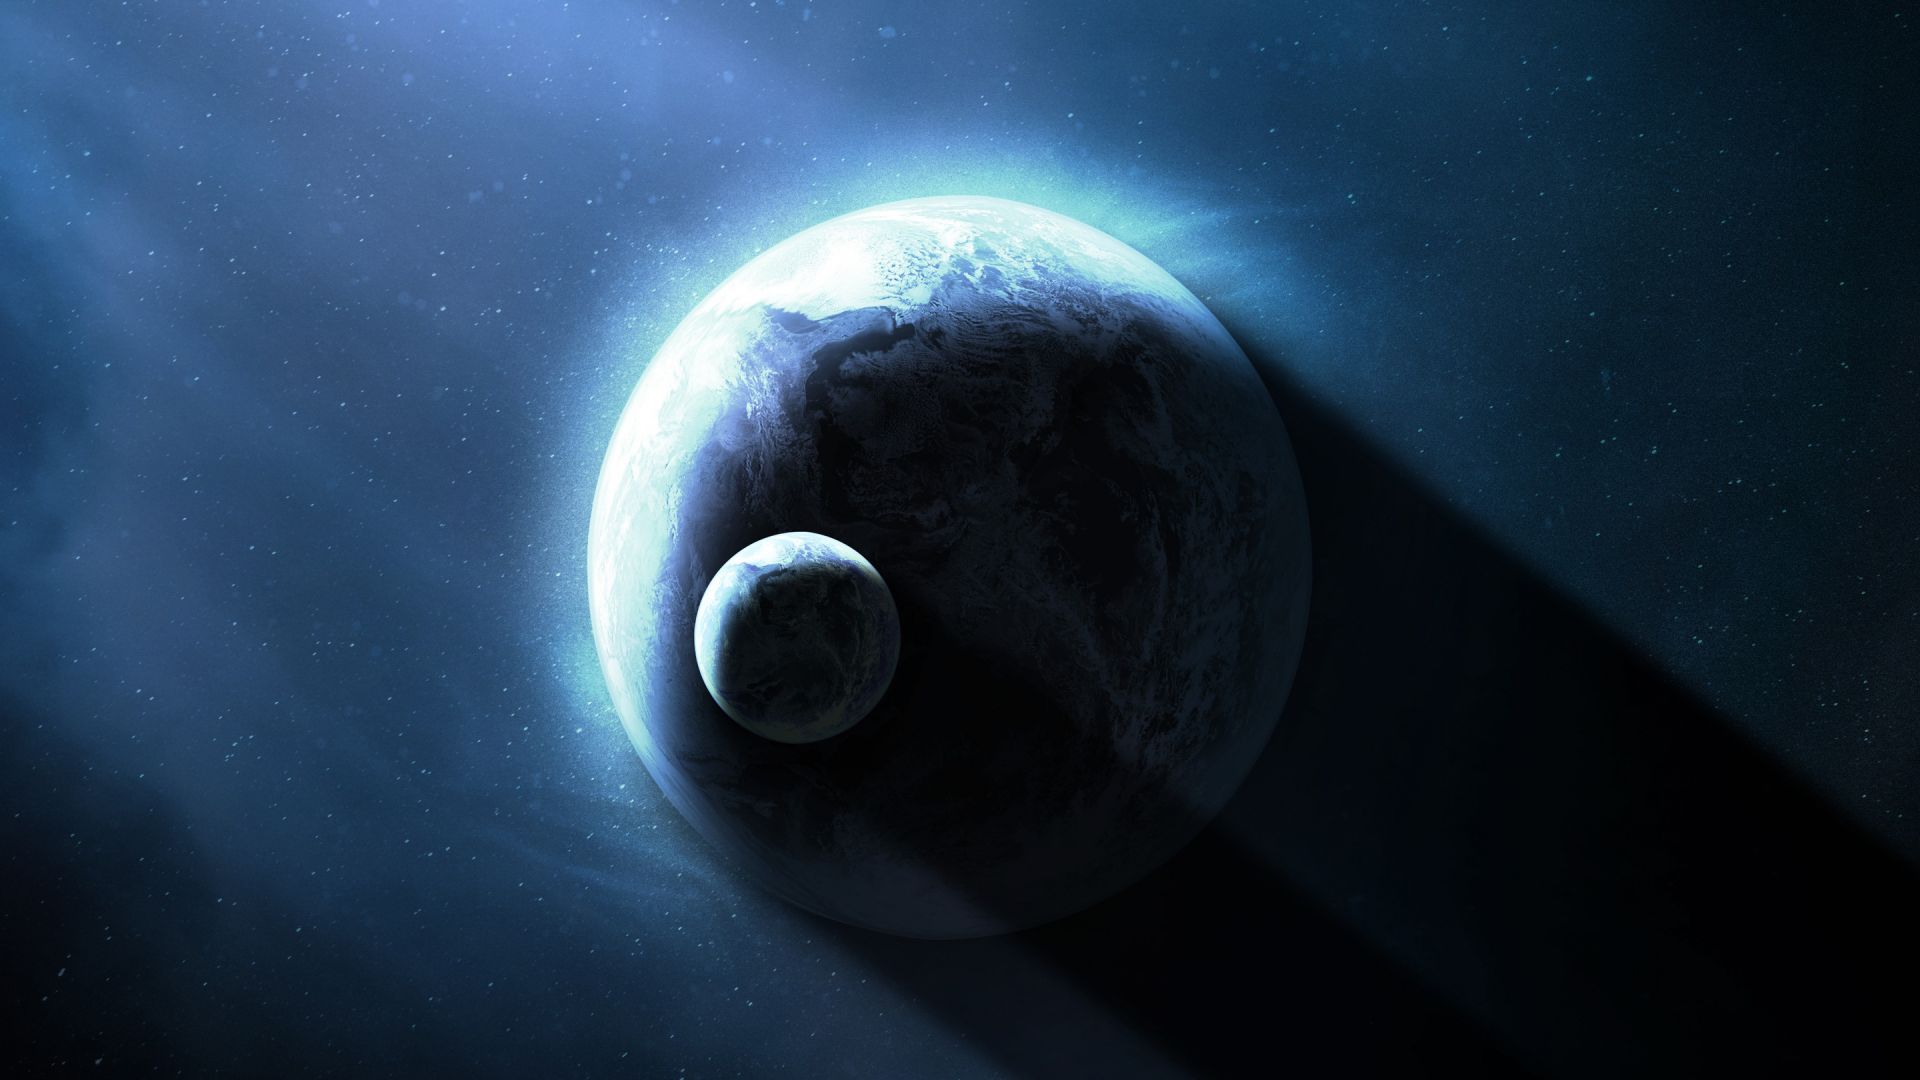 Wallpaper Space, planet, earth and moon